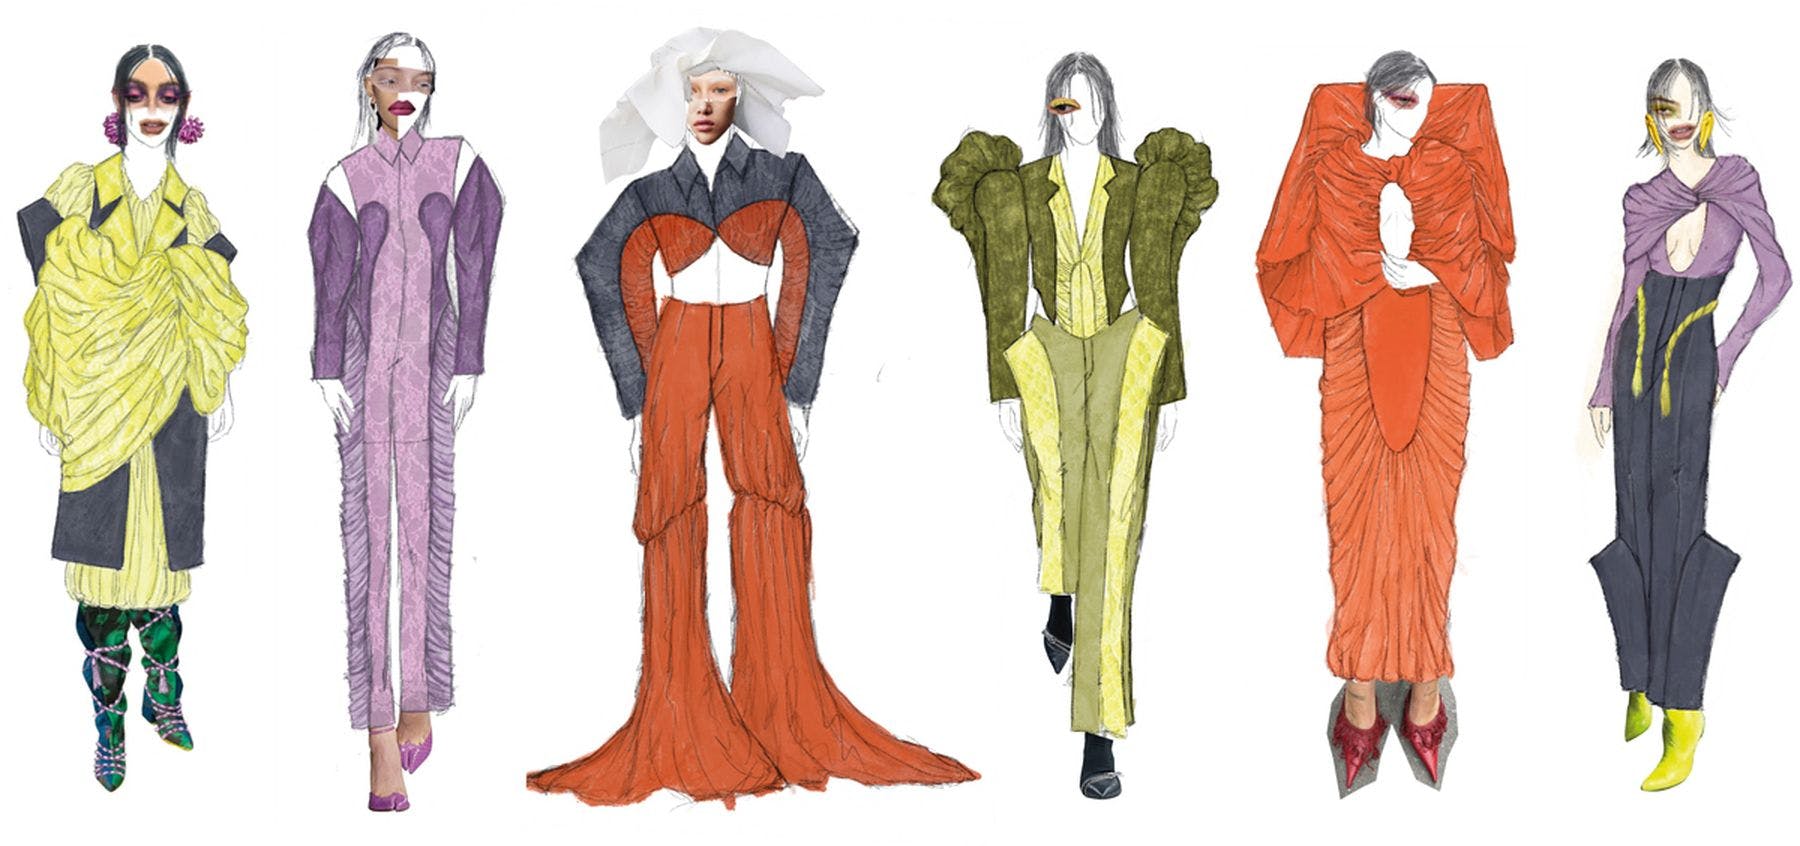 A series of design drawings with collage featuring models wearing different outfits. These include dresses, jackets, trousers, tops in lilacs, yellows, oranges and greens.